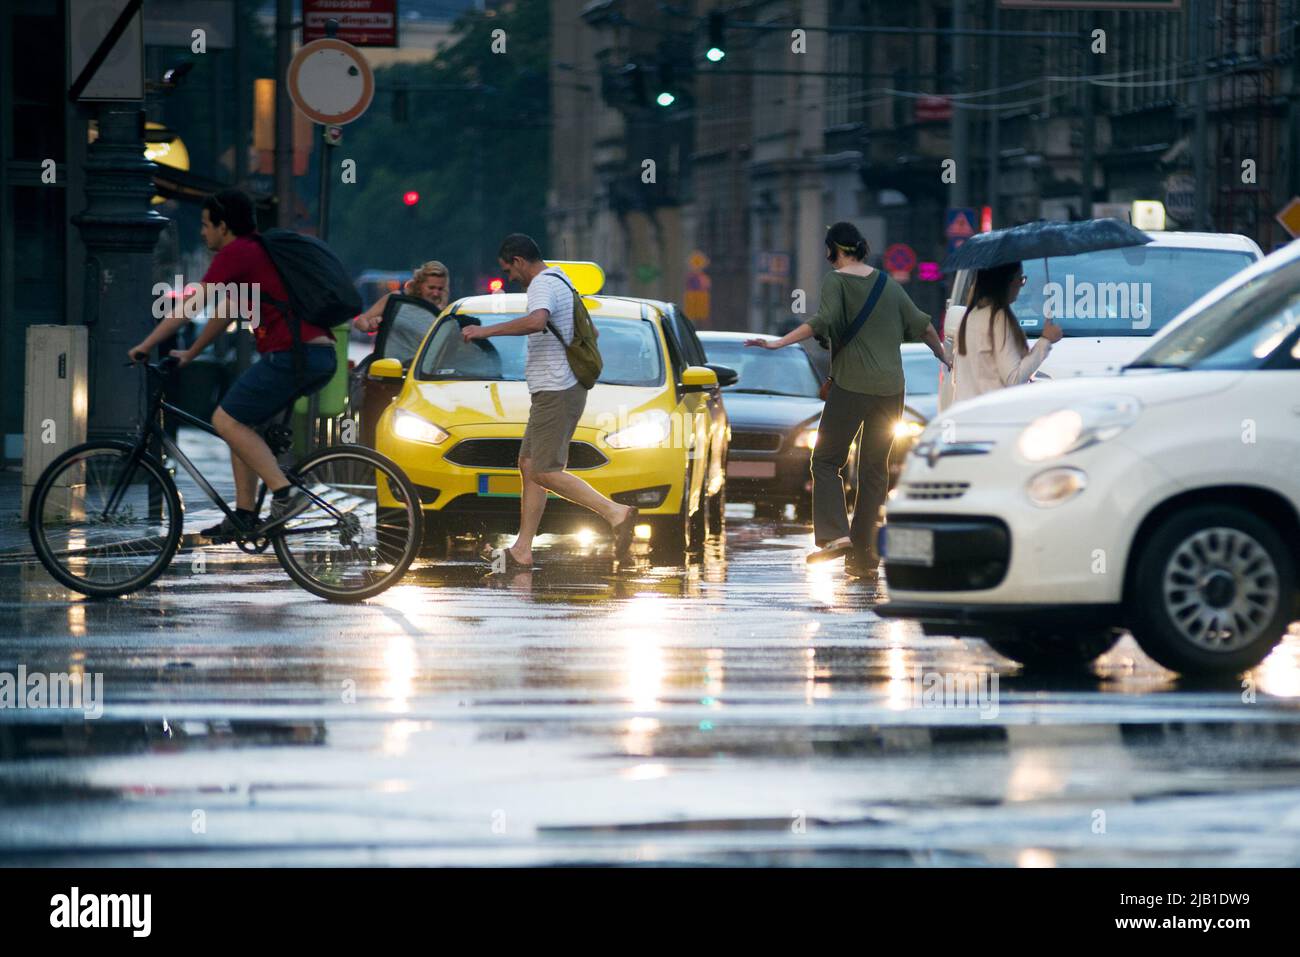 Rainfall in the city. People crossing the street, jumping over puddles Stock Photo